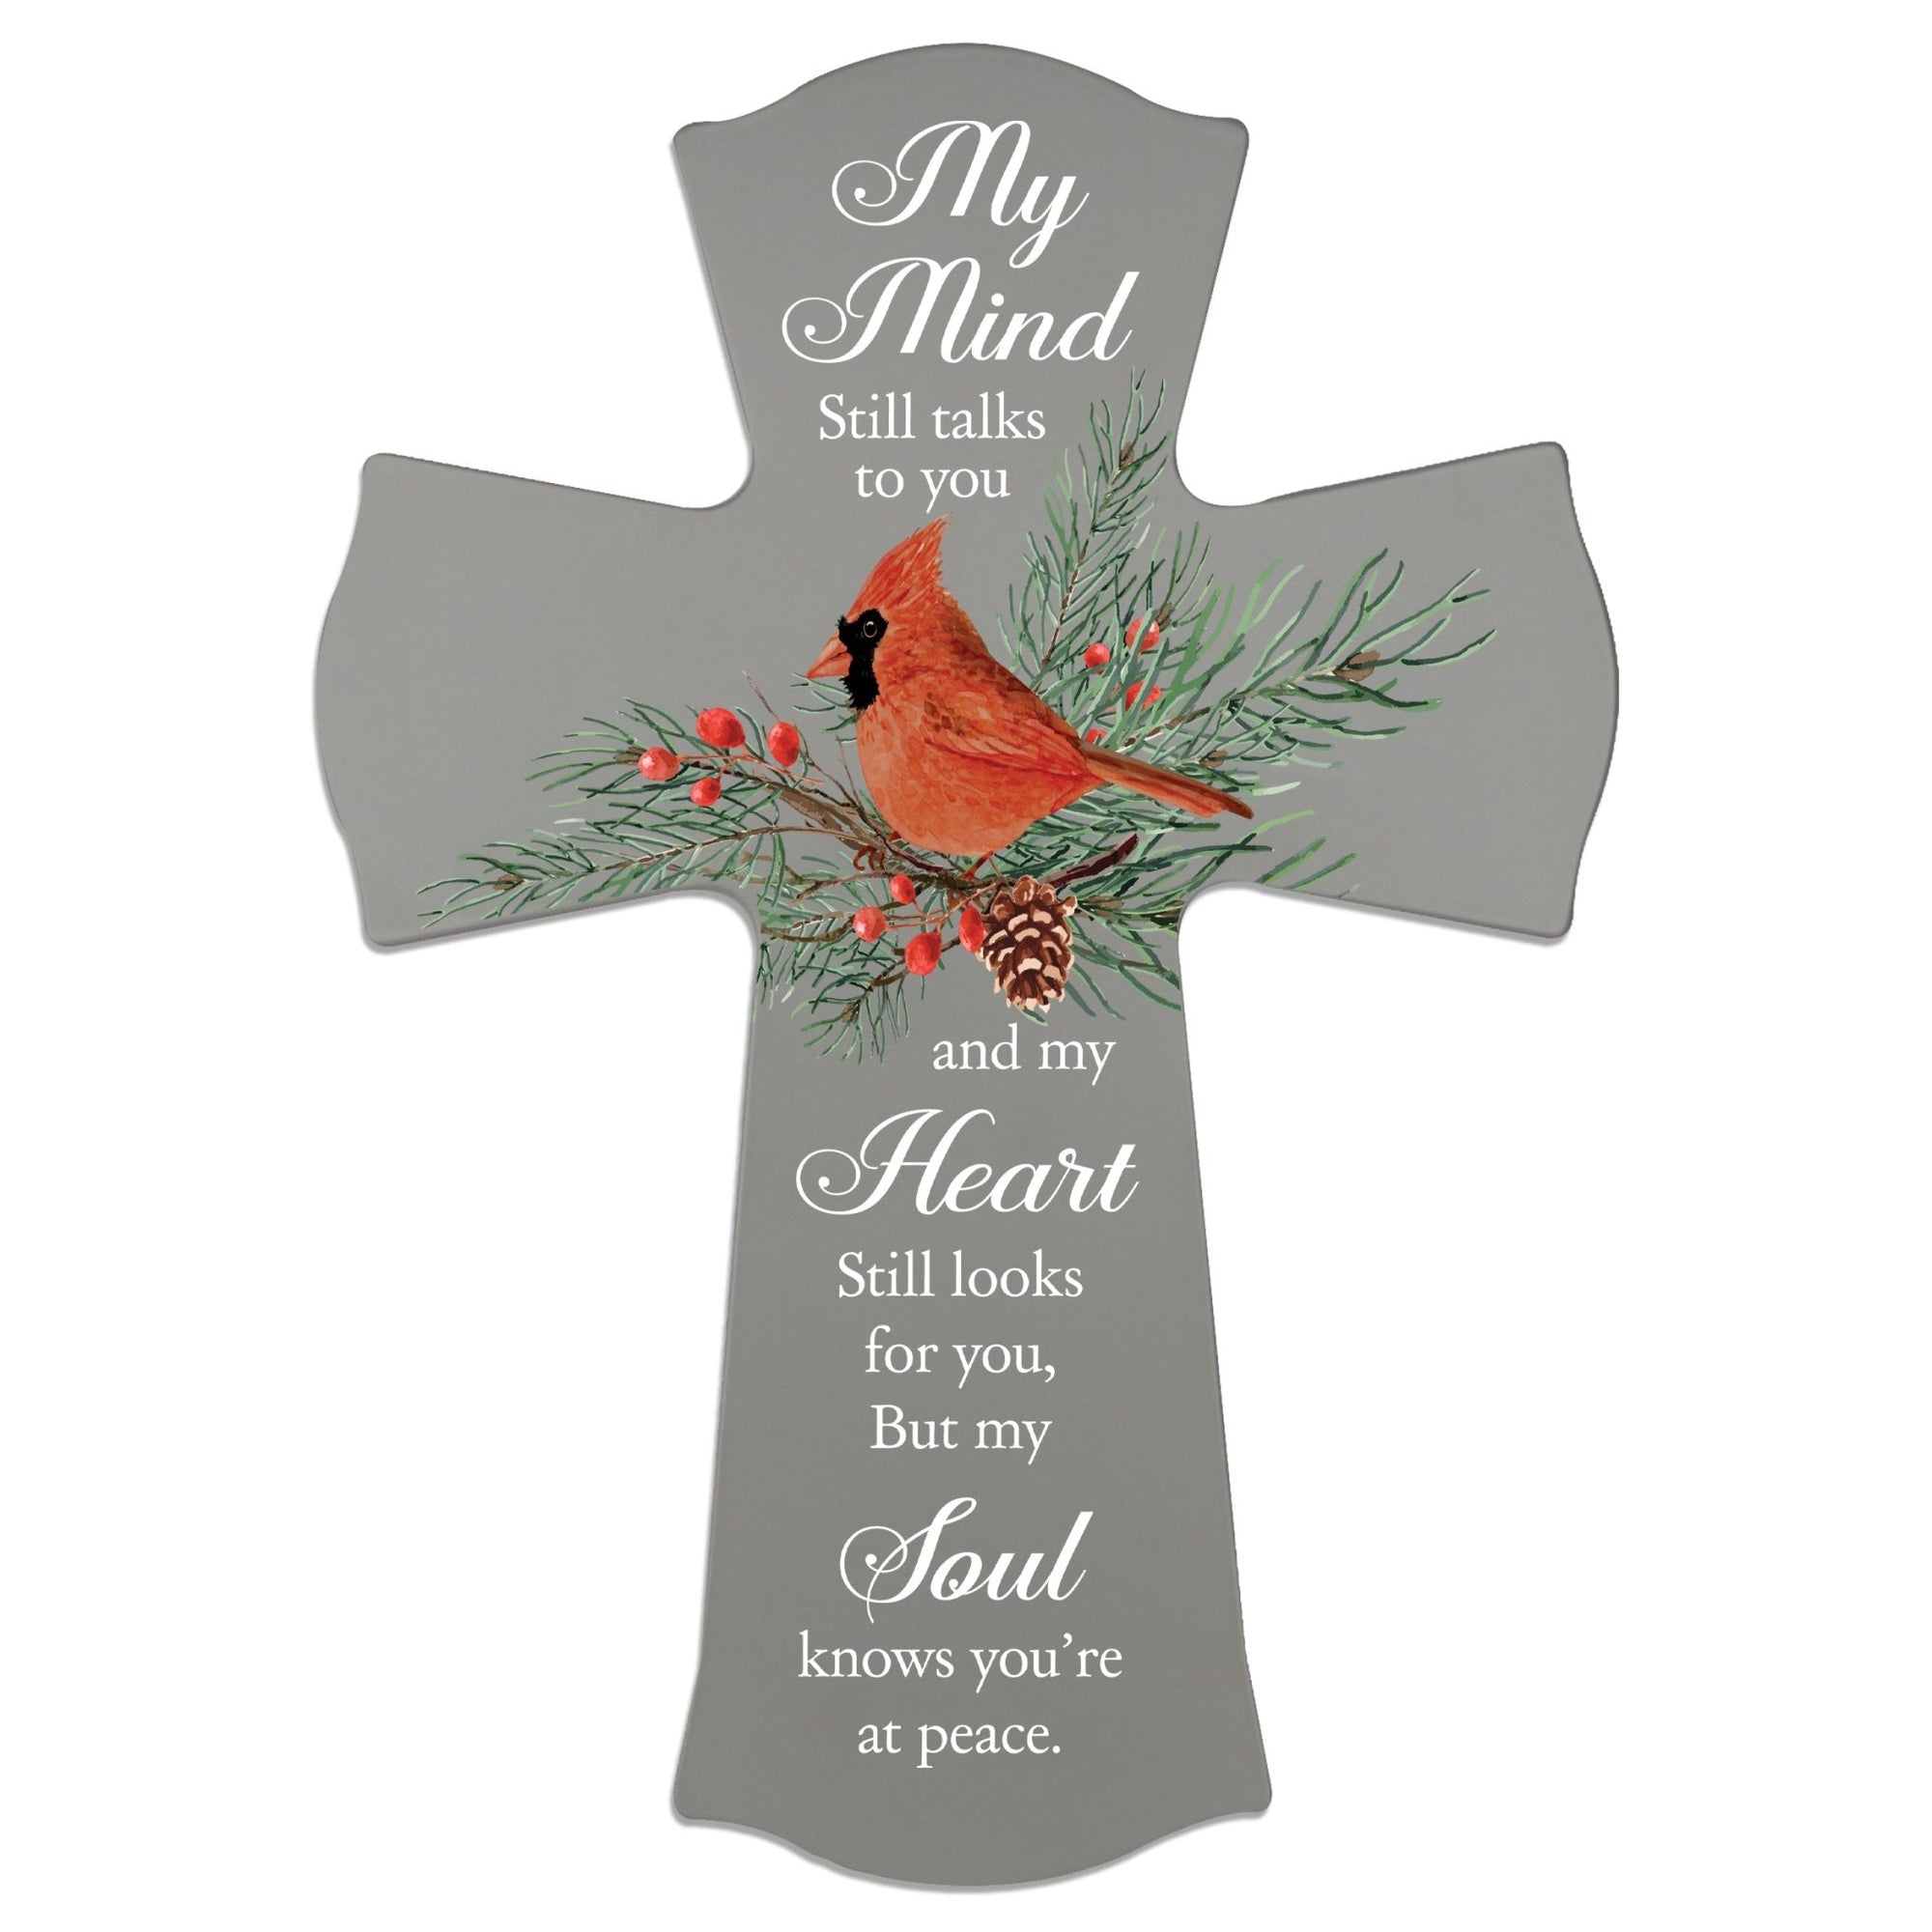 Memorial Wooden Wall Cross 8x11 Cardinal Bereavement Gift for Loss on Loved One – My mind Still talks - LifeSong Milestones